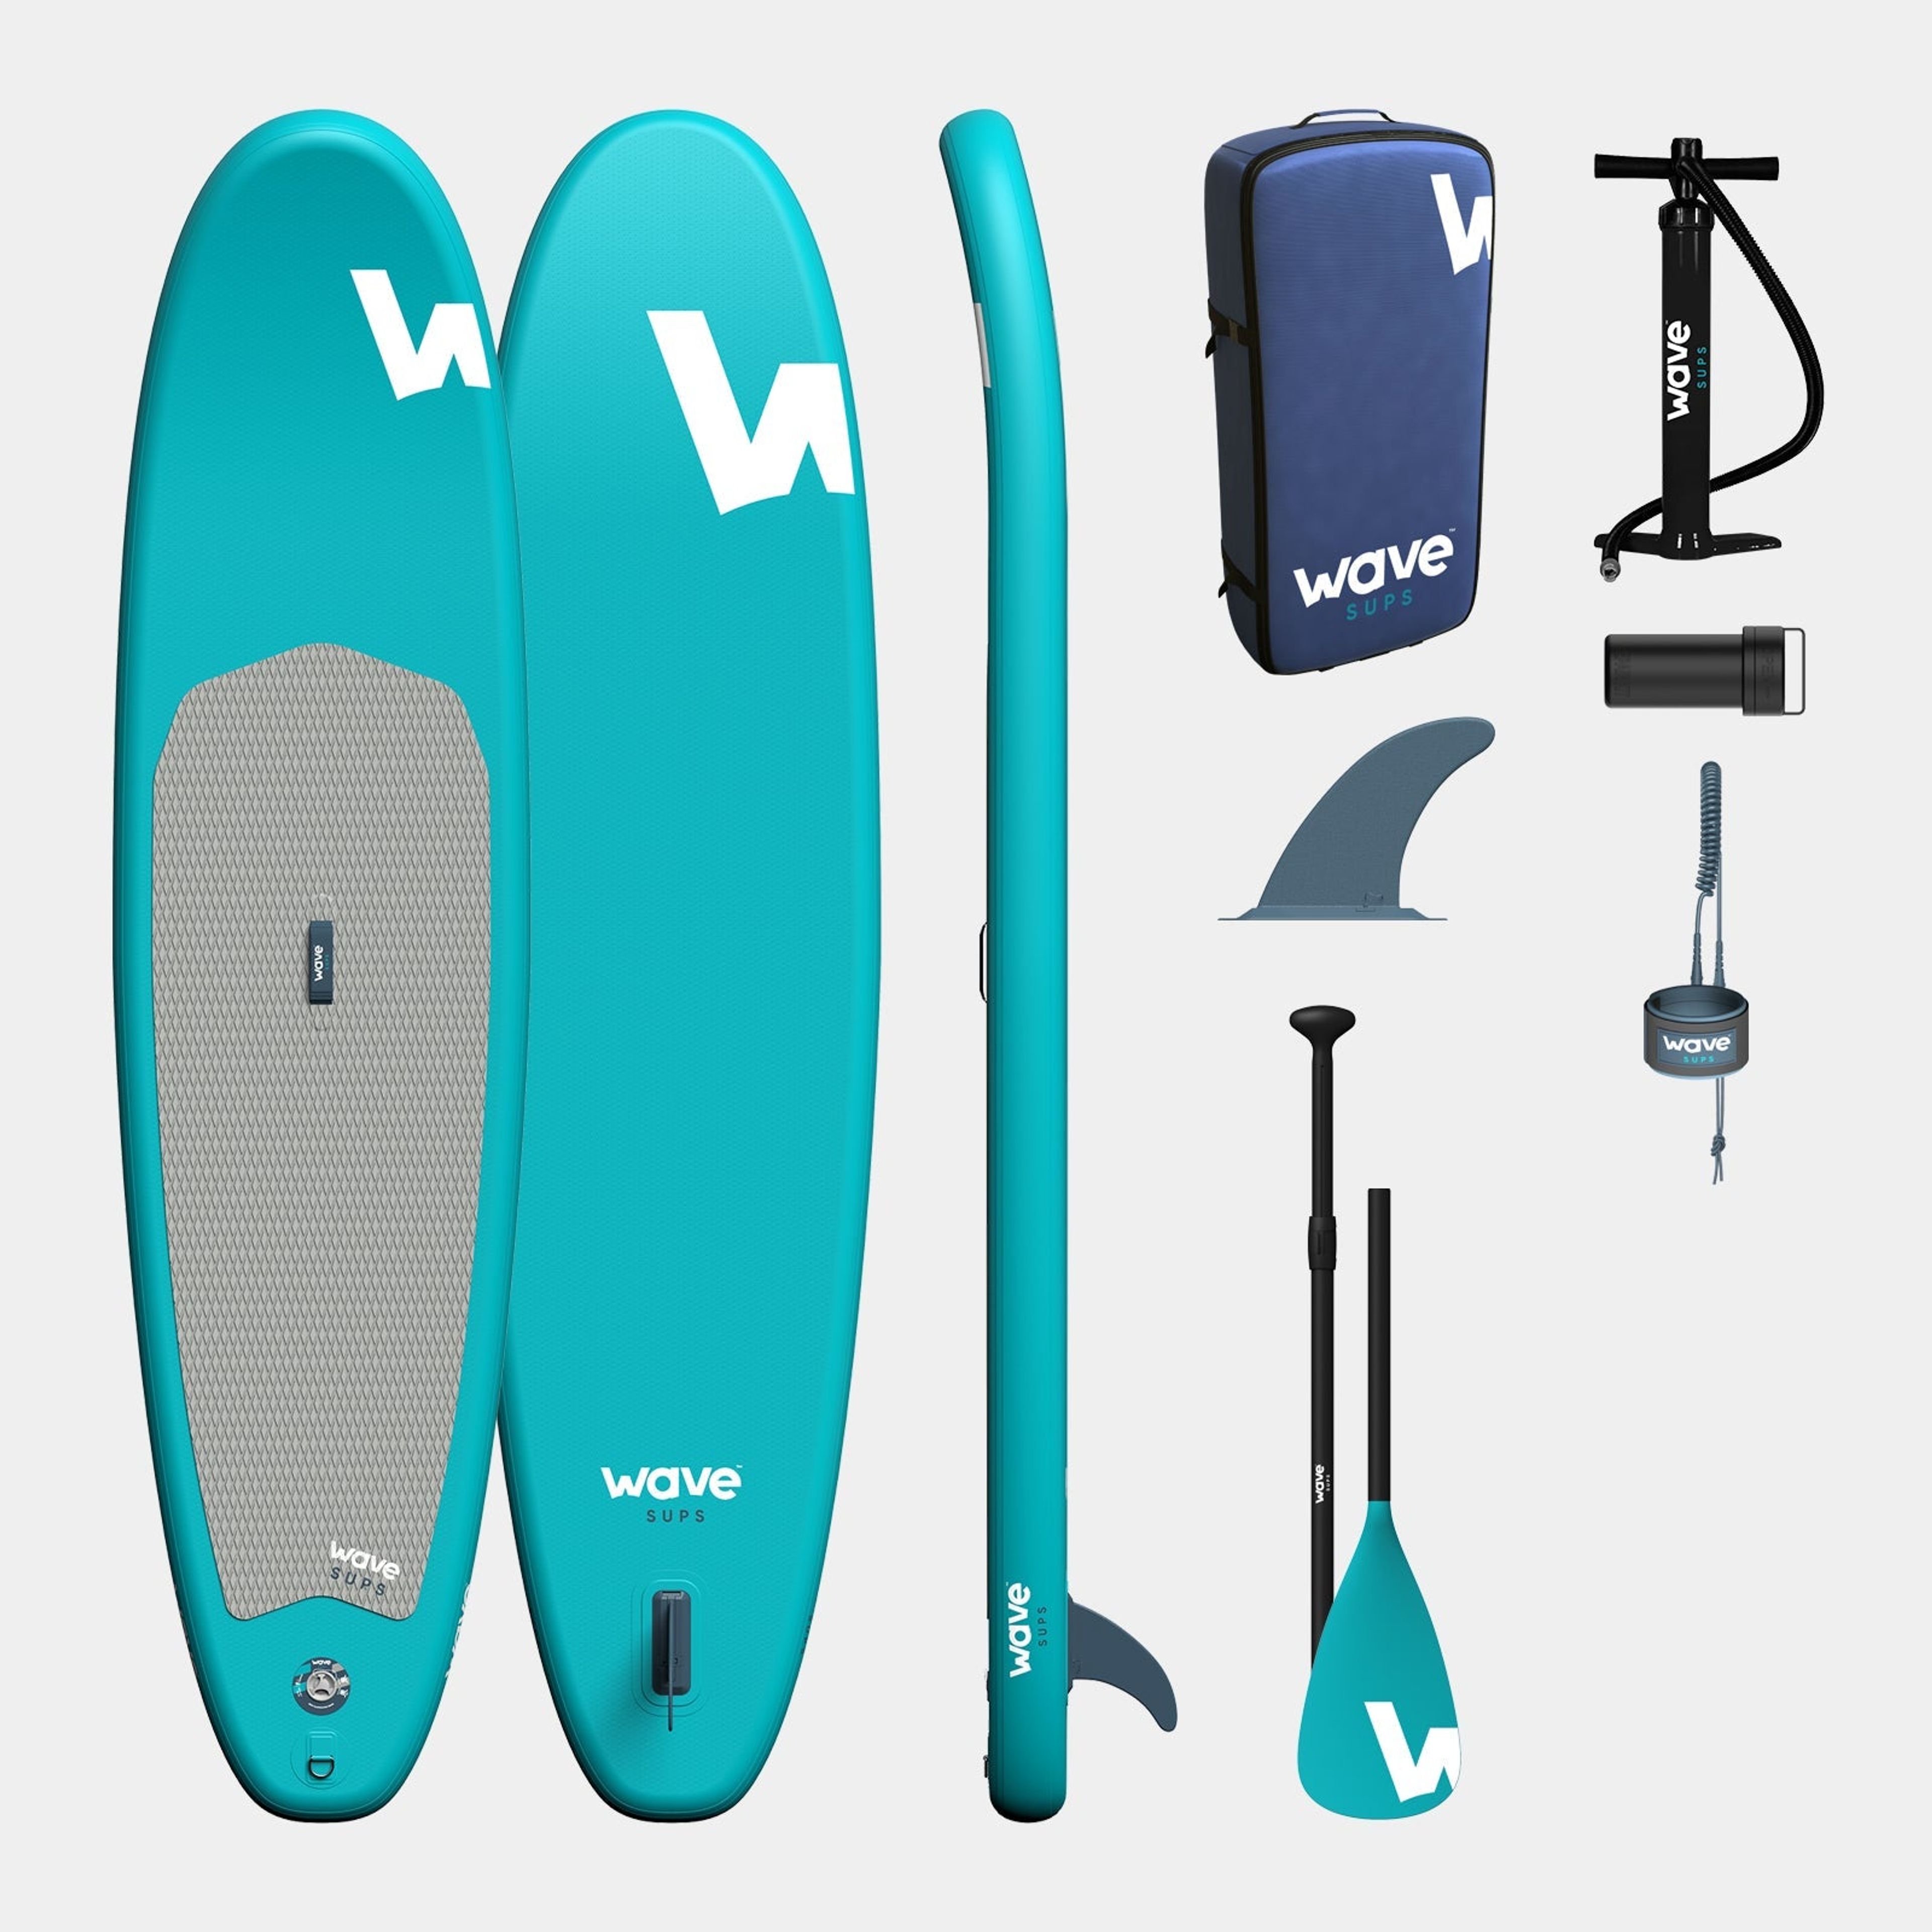 Cruiser SUP | Inflatable Stand-Up Paddleboard | 10/11ft | Aqua